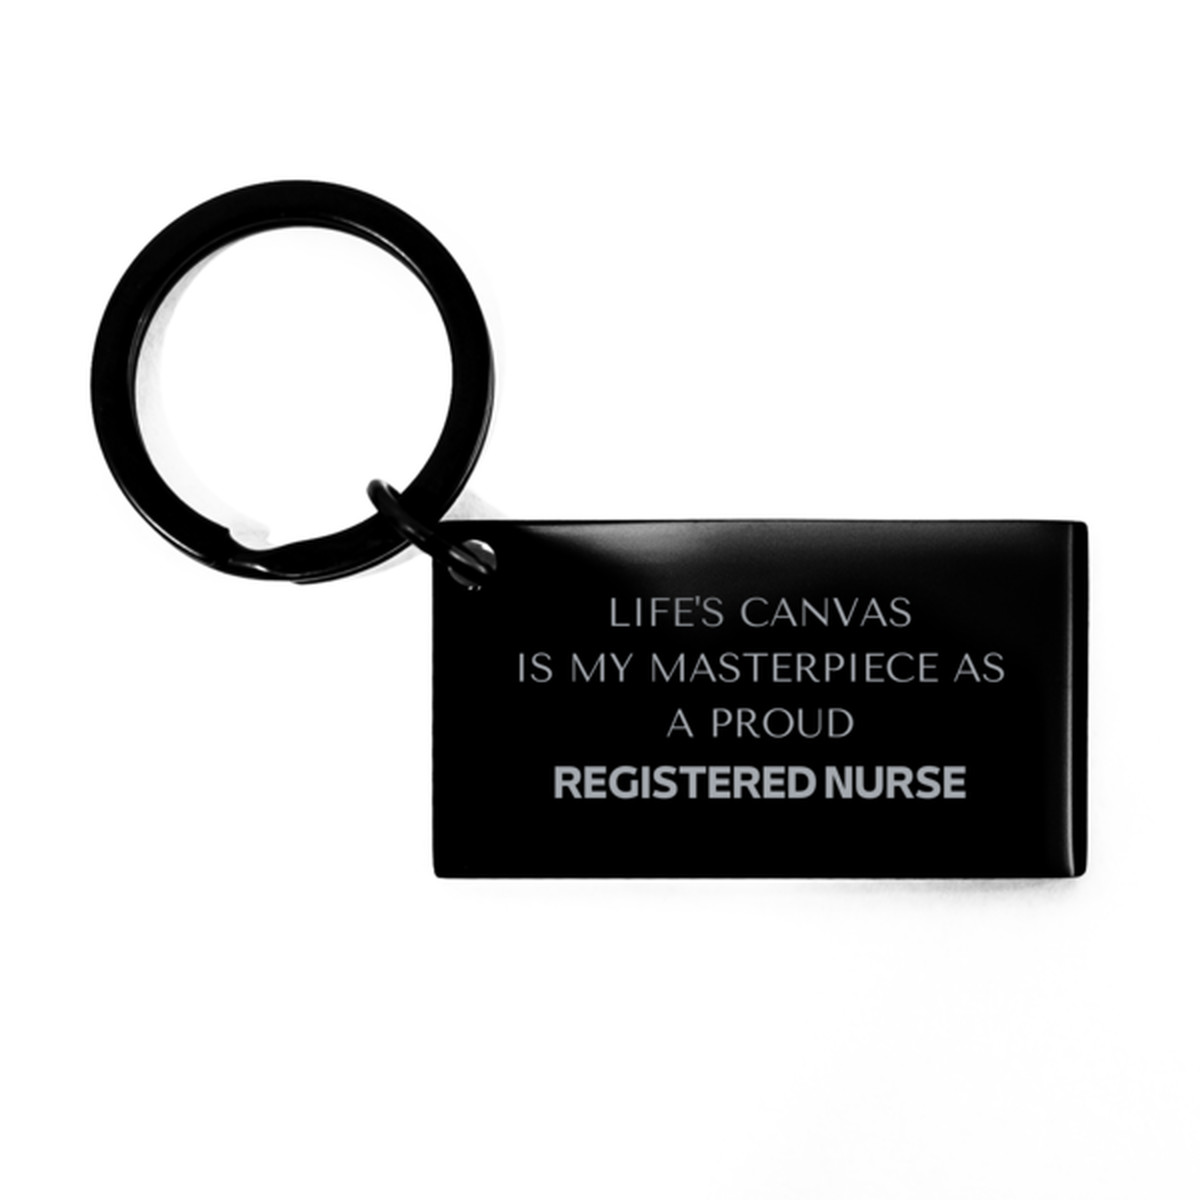 Proud Registered Nurse Gifts, Life's canvas is my masterpiece, Epic Birthday Christmas Unique Keychain For Registered Nurse, Coworkers, Men, Women, Friends